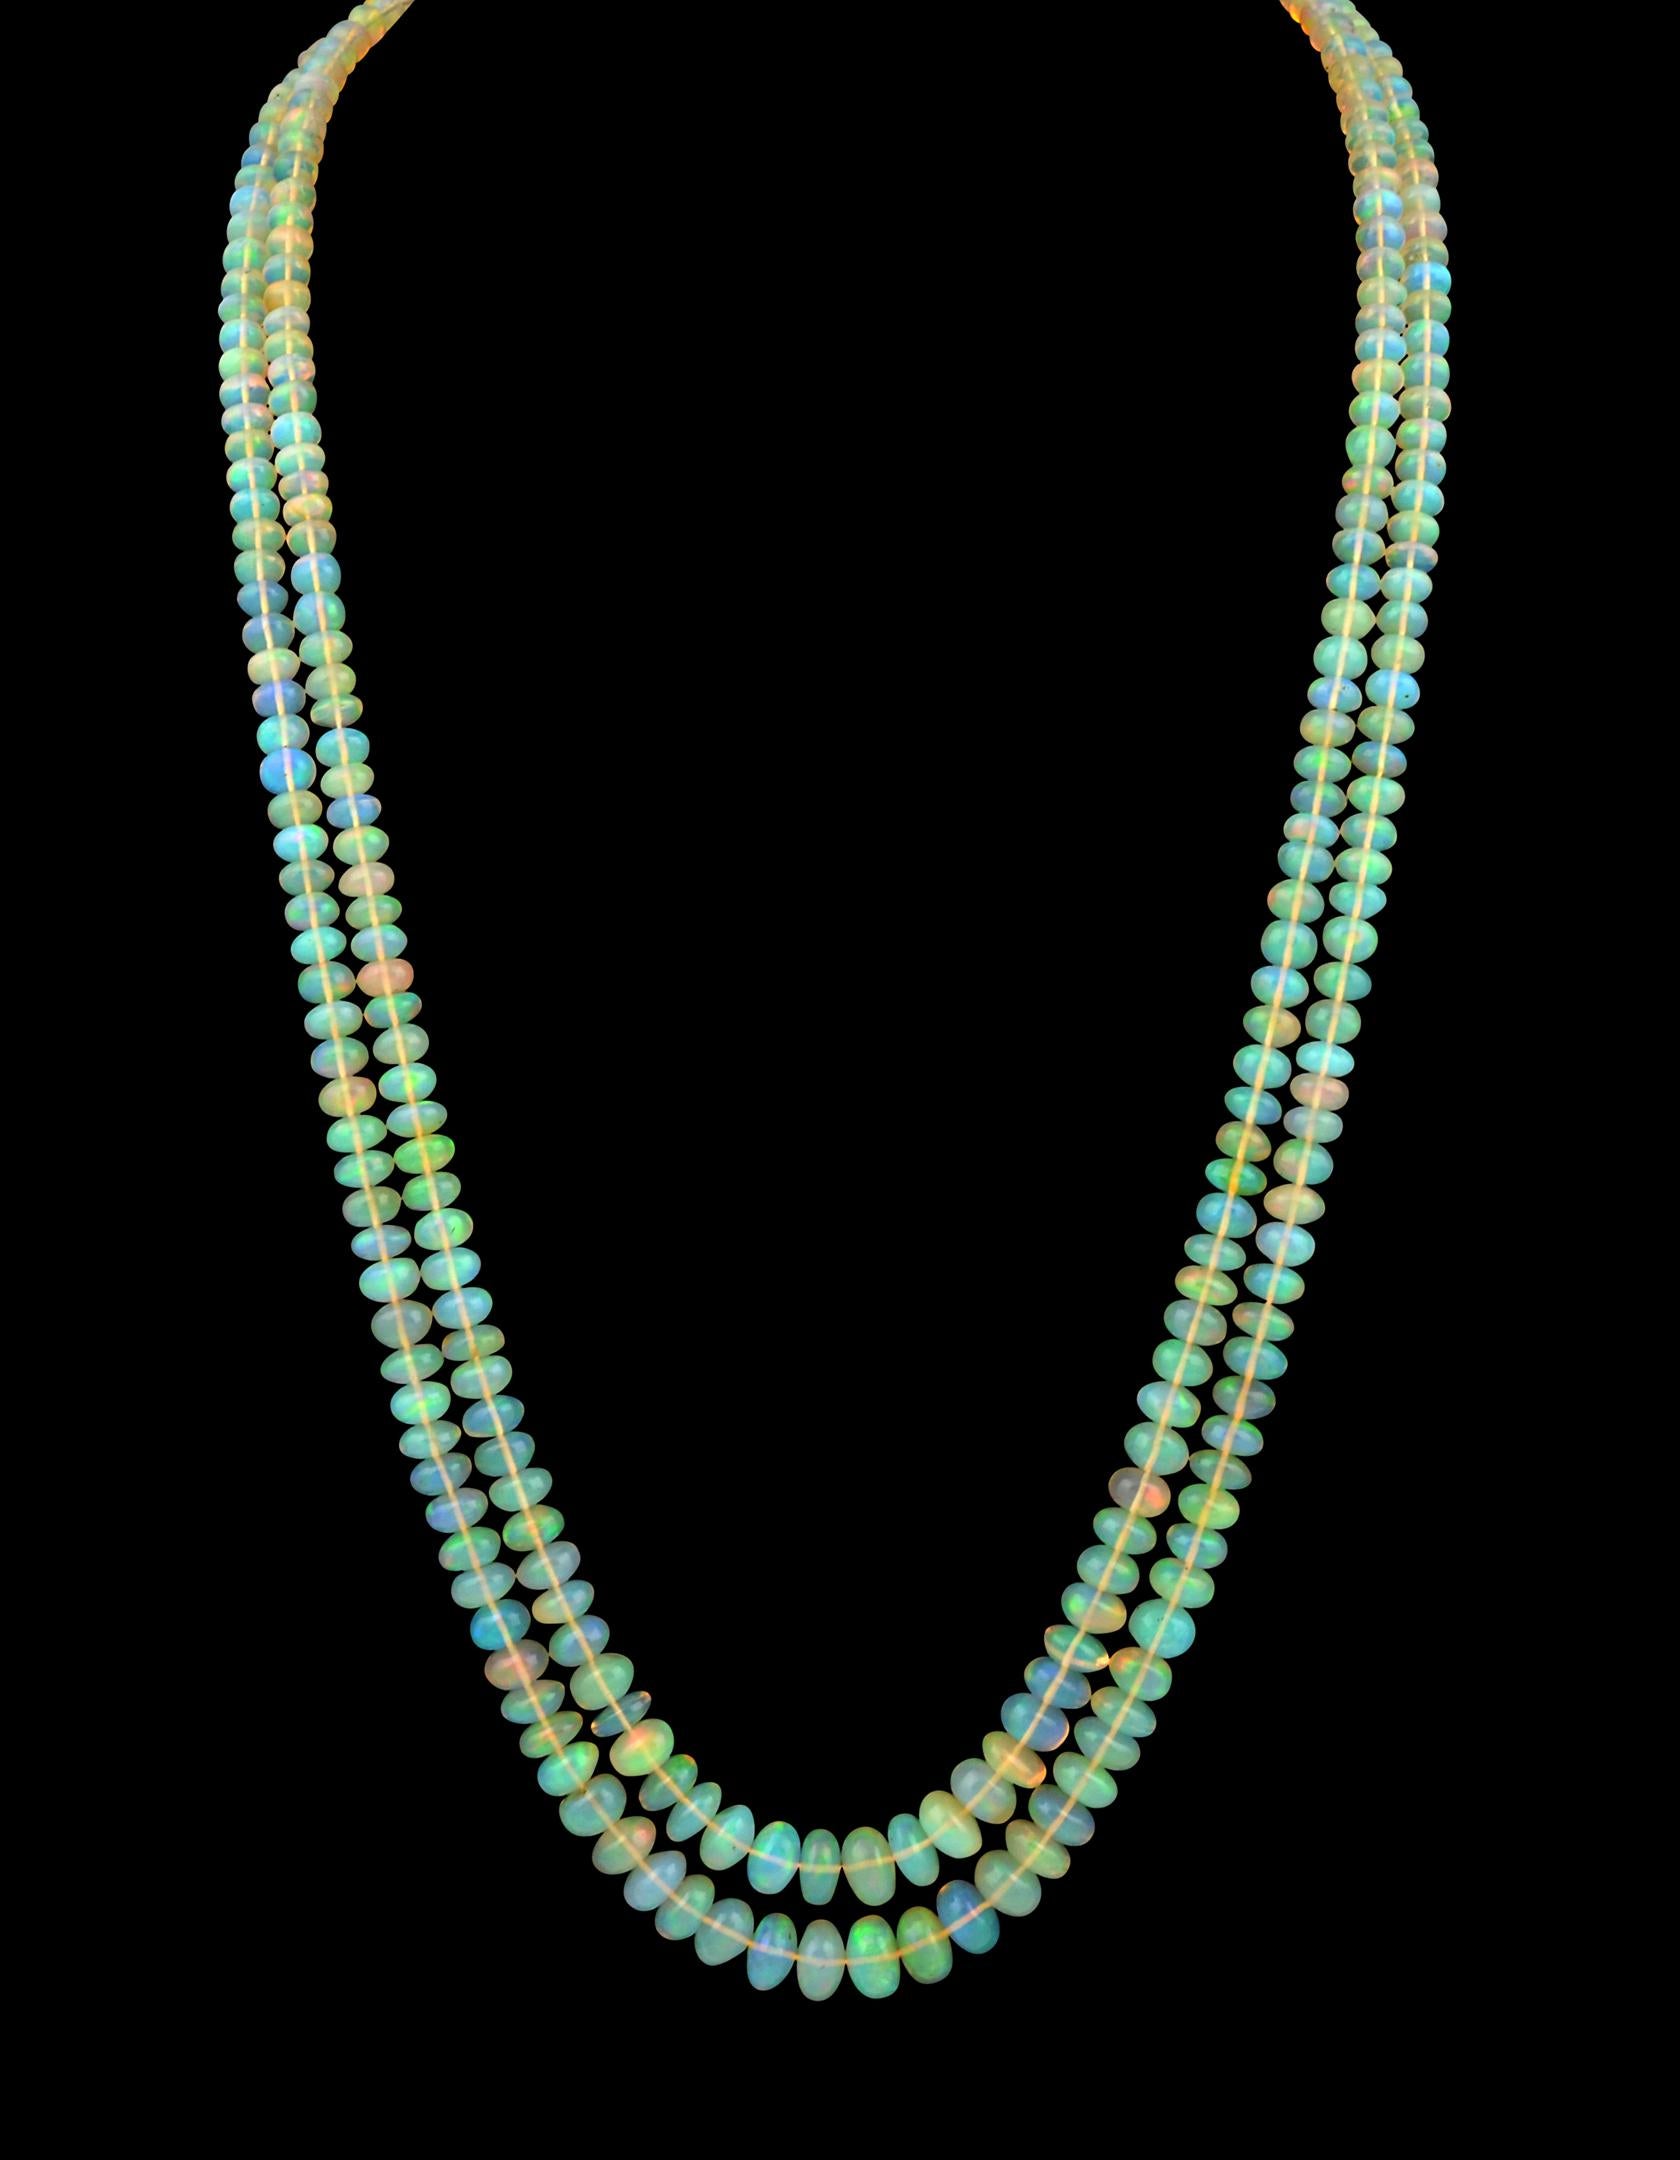 Natural 265 Ct Ethiopian Opal Bead Double Strand Necklace 14 Karat Yellow Gold 2